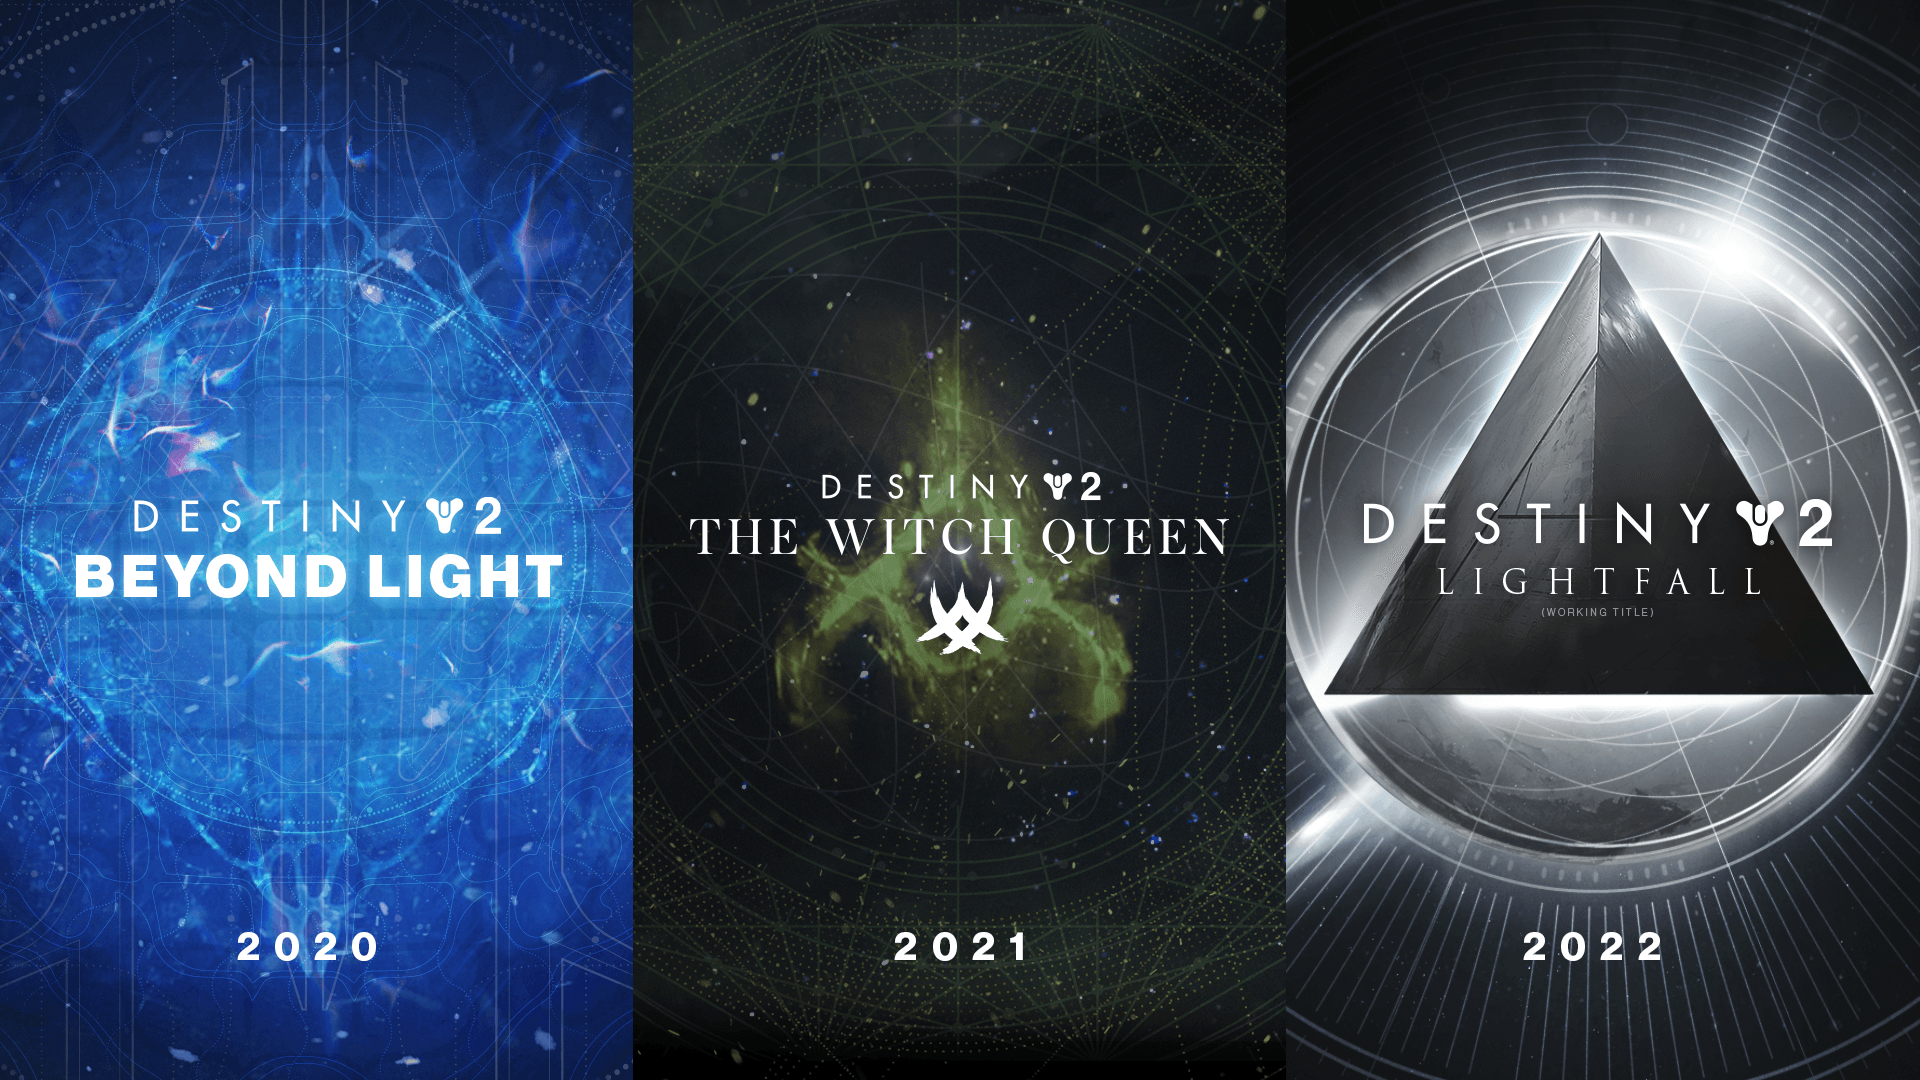 Destiny 2: The Witch Queen and Lightfall Expansions and Future of the MMO Revealed. Den of Geek